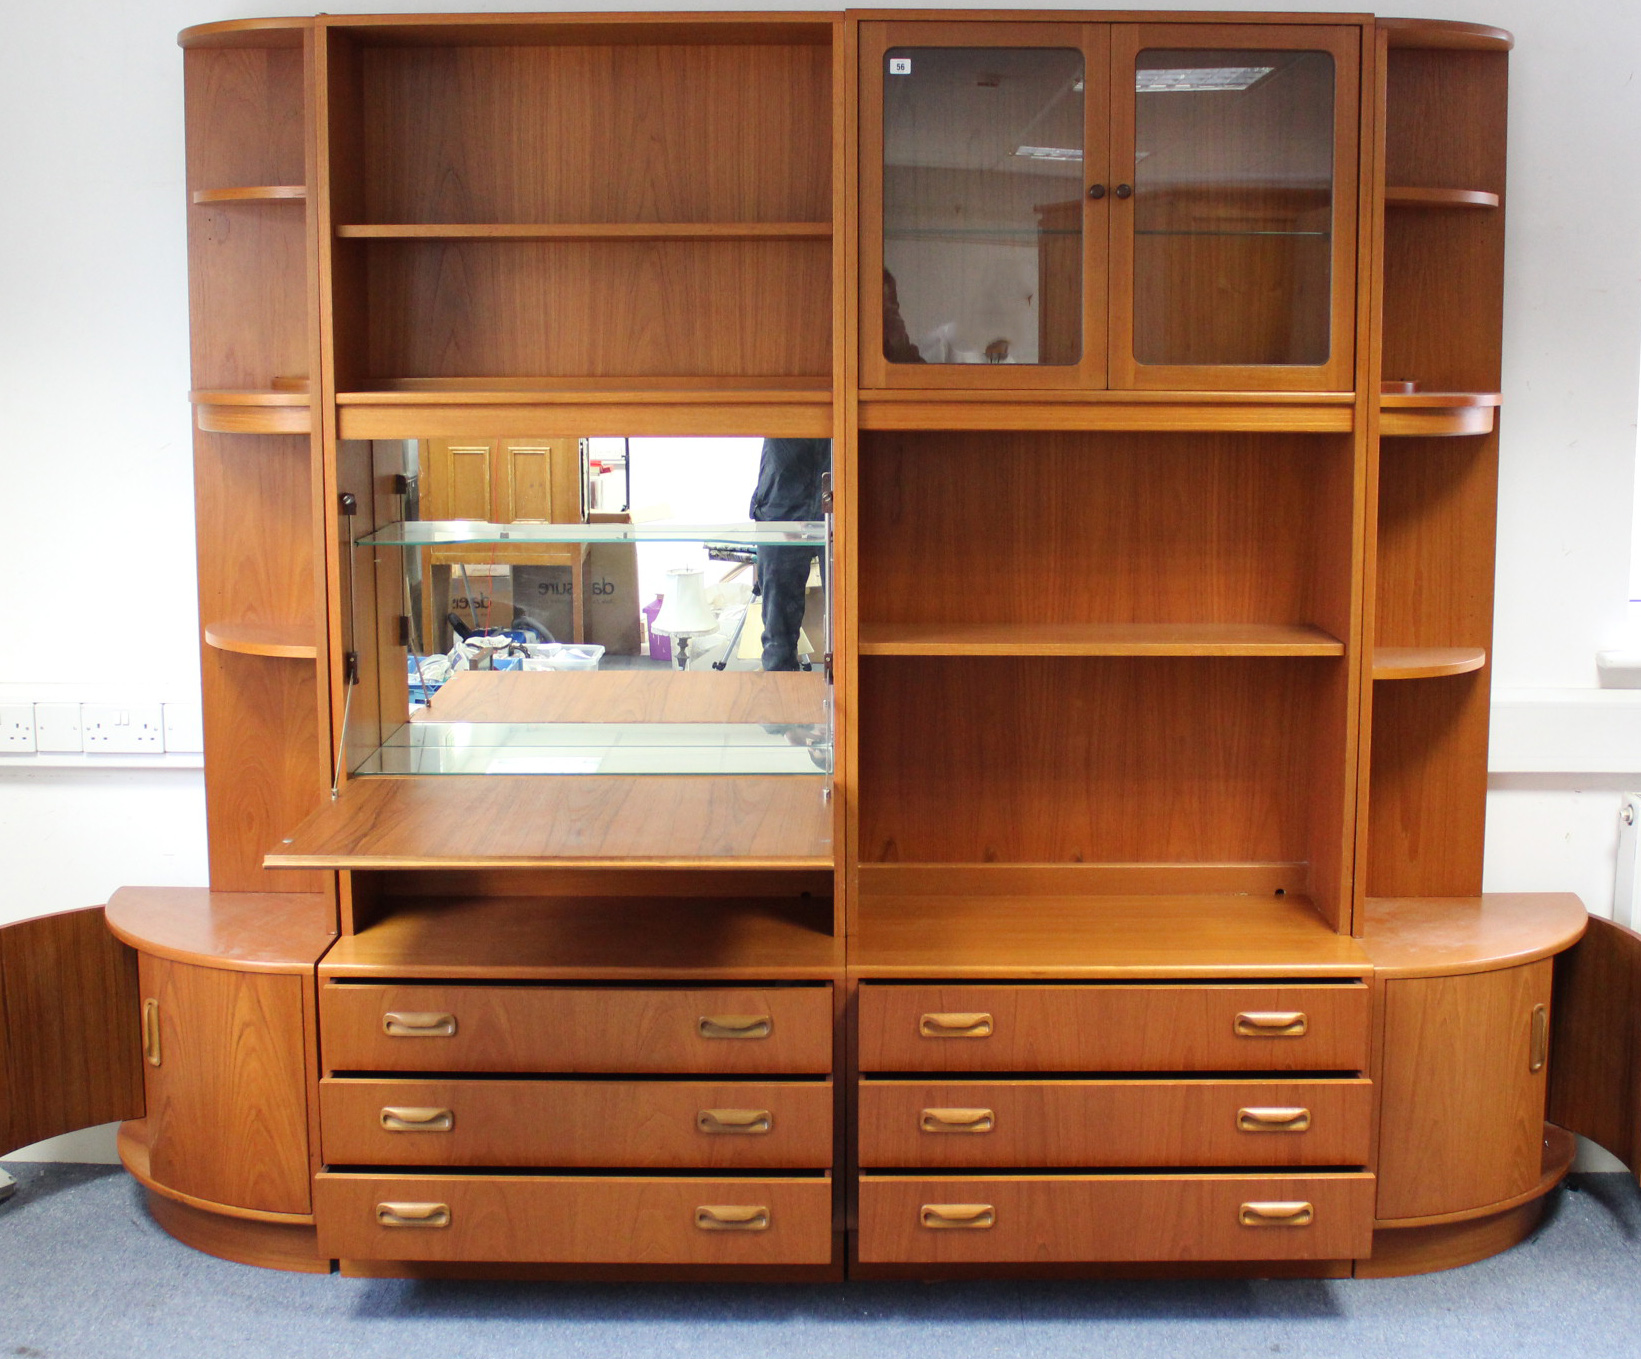 A G-PLAN TEAK TALL INTER-CHANGEABLE WALL UNIT fitted with an arrangement of drawers, cupboards & - Image 2 of 2